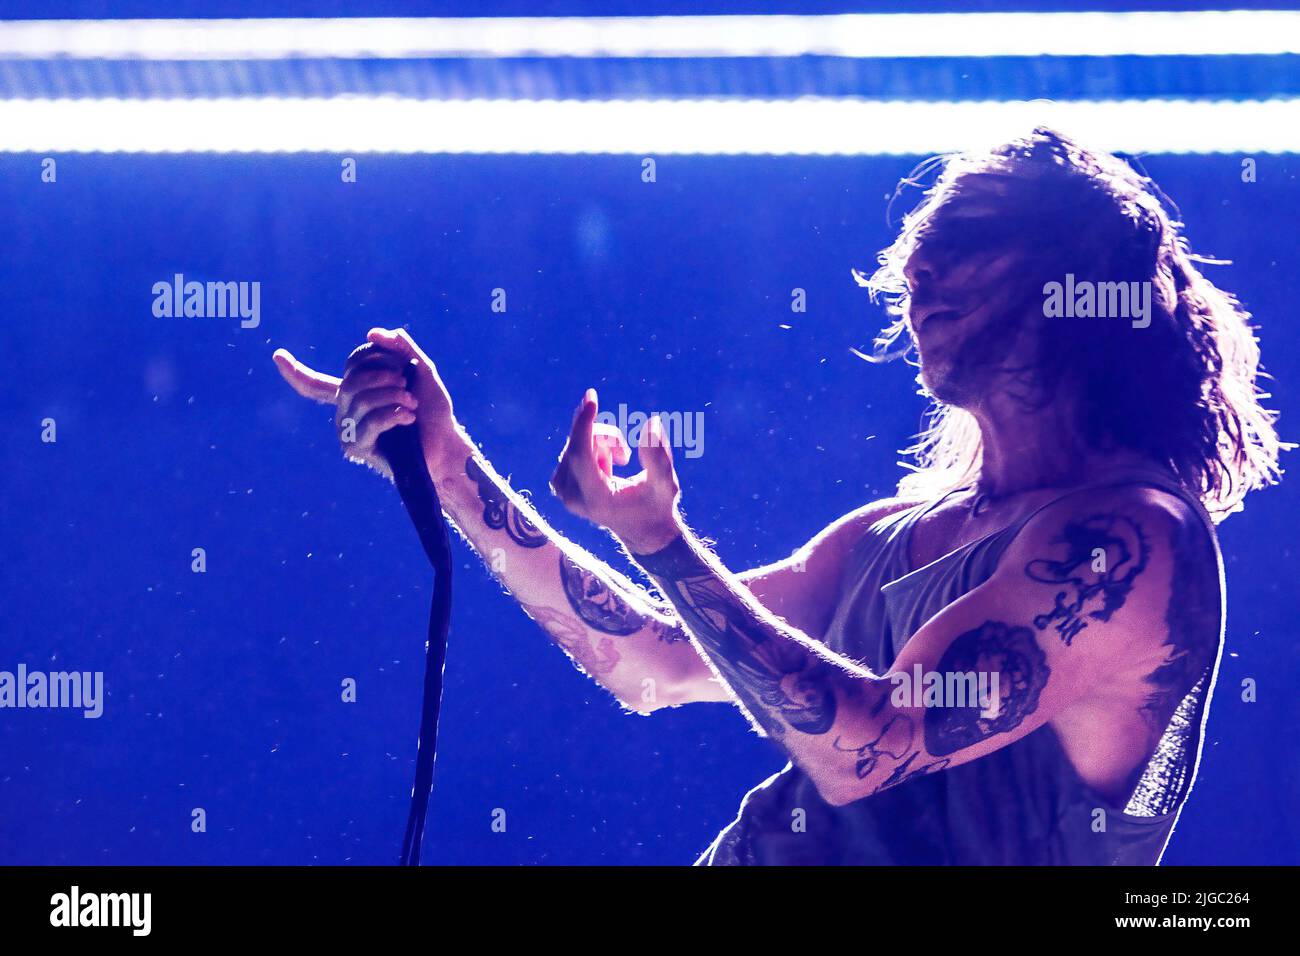 Brandon Boyd of the band Incubus performs on stage at the MadCool Festival in Madrid. Stock Photo